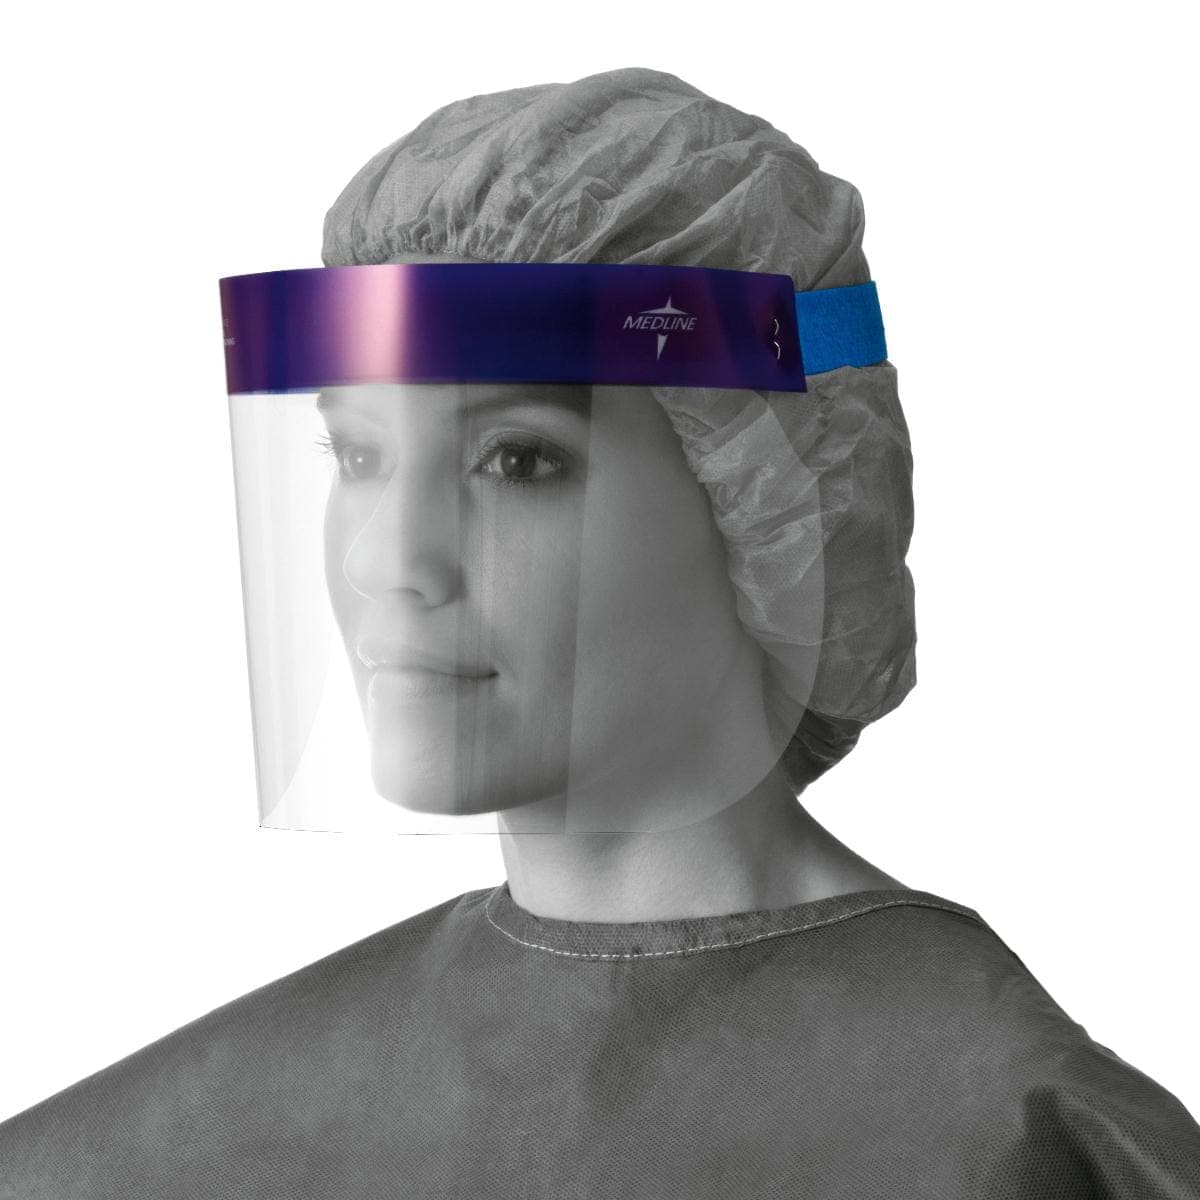 Medline Medline 3/4 Length Disposable Face Shields with Foam Top and Elastic Band NONFS400